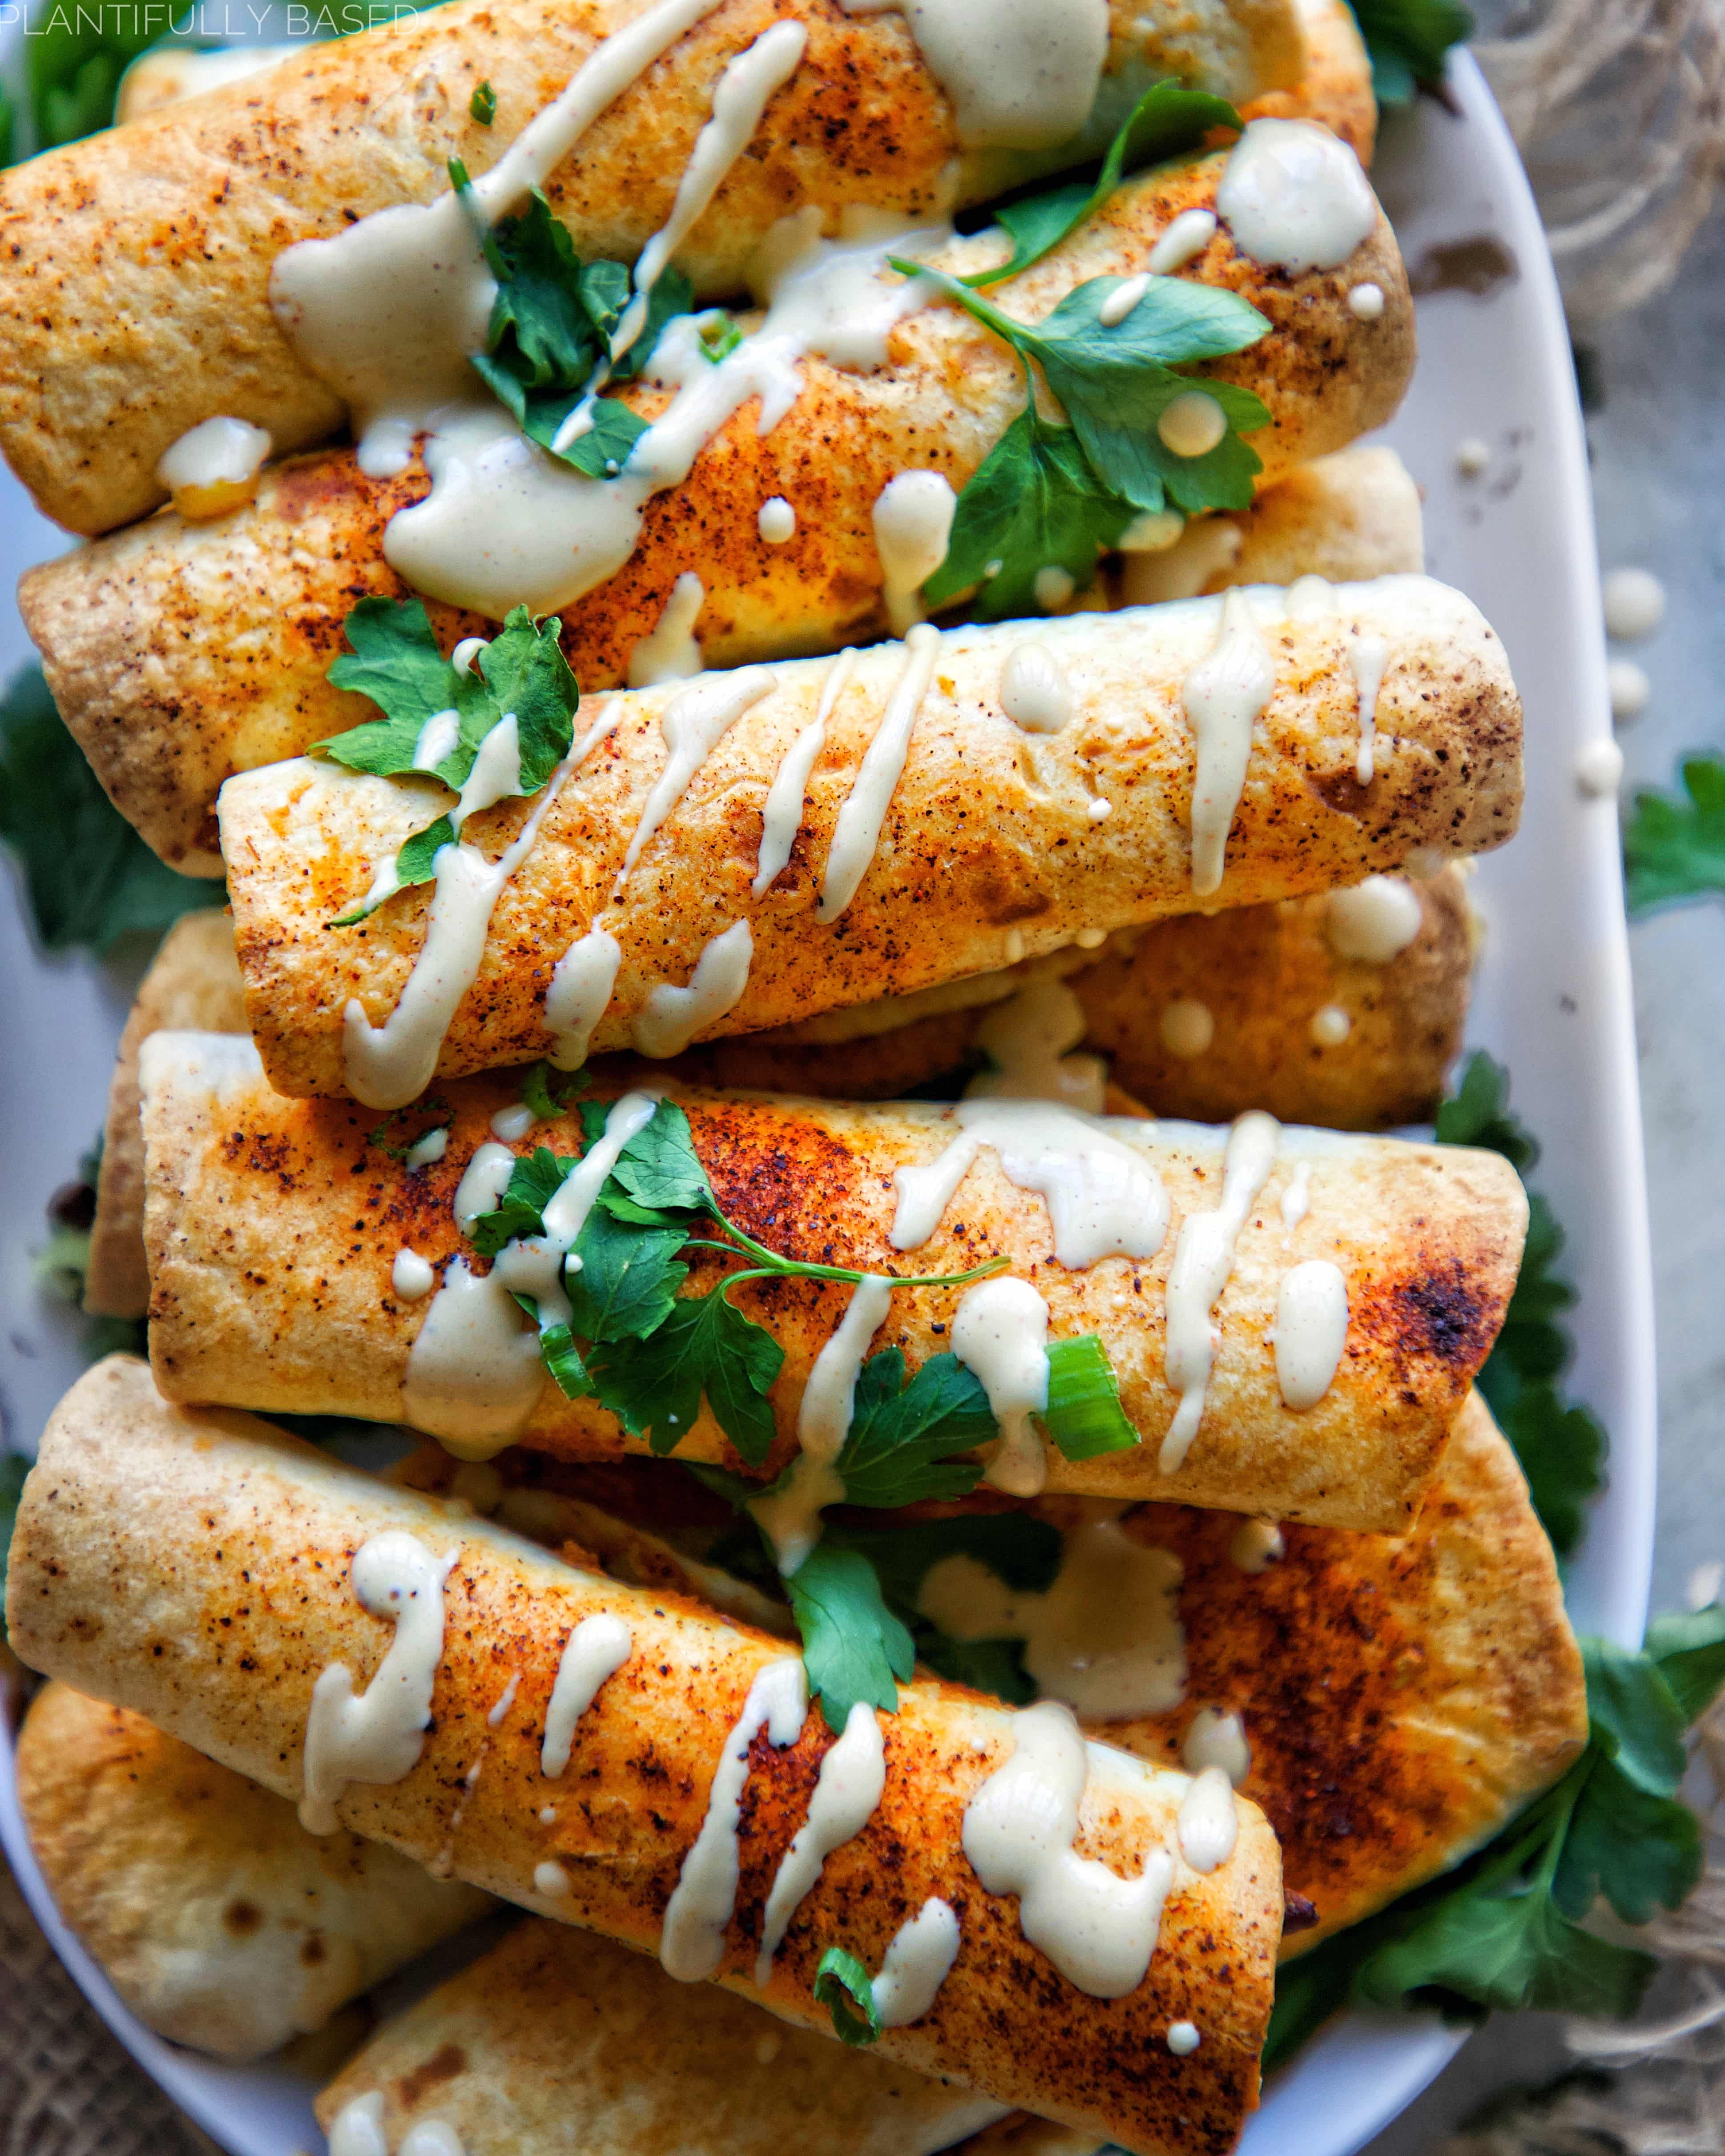 image of flautas drizzled with sauce, birds eye view, laying flat in a dish